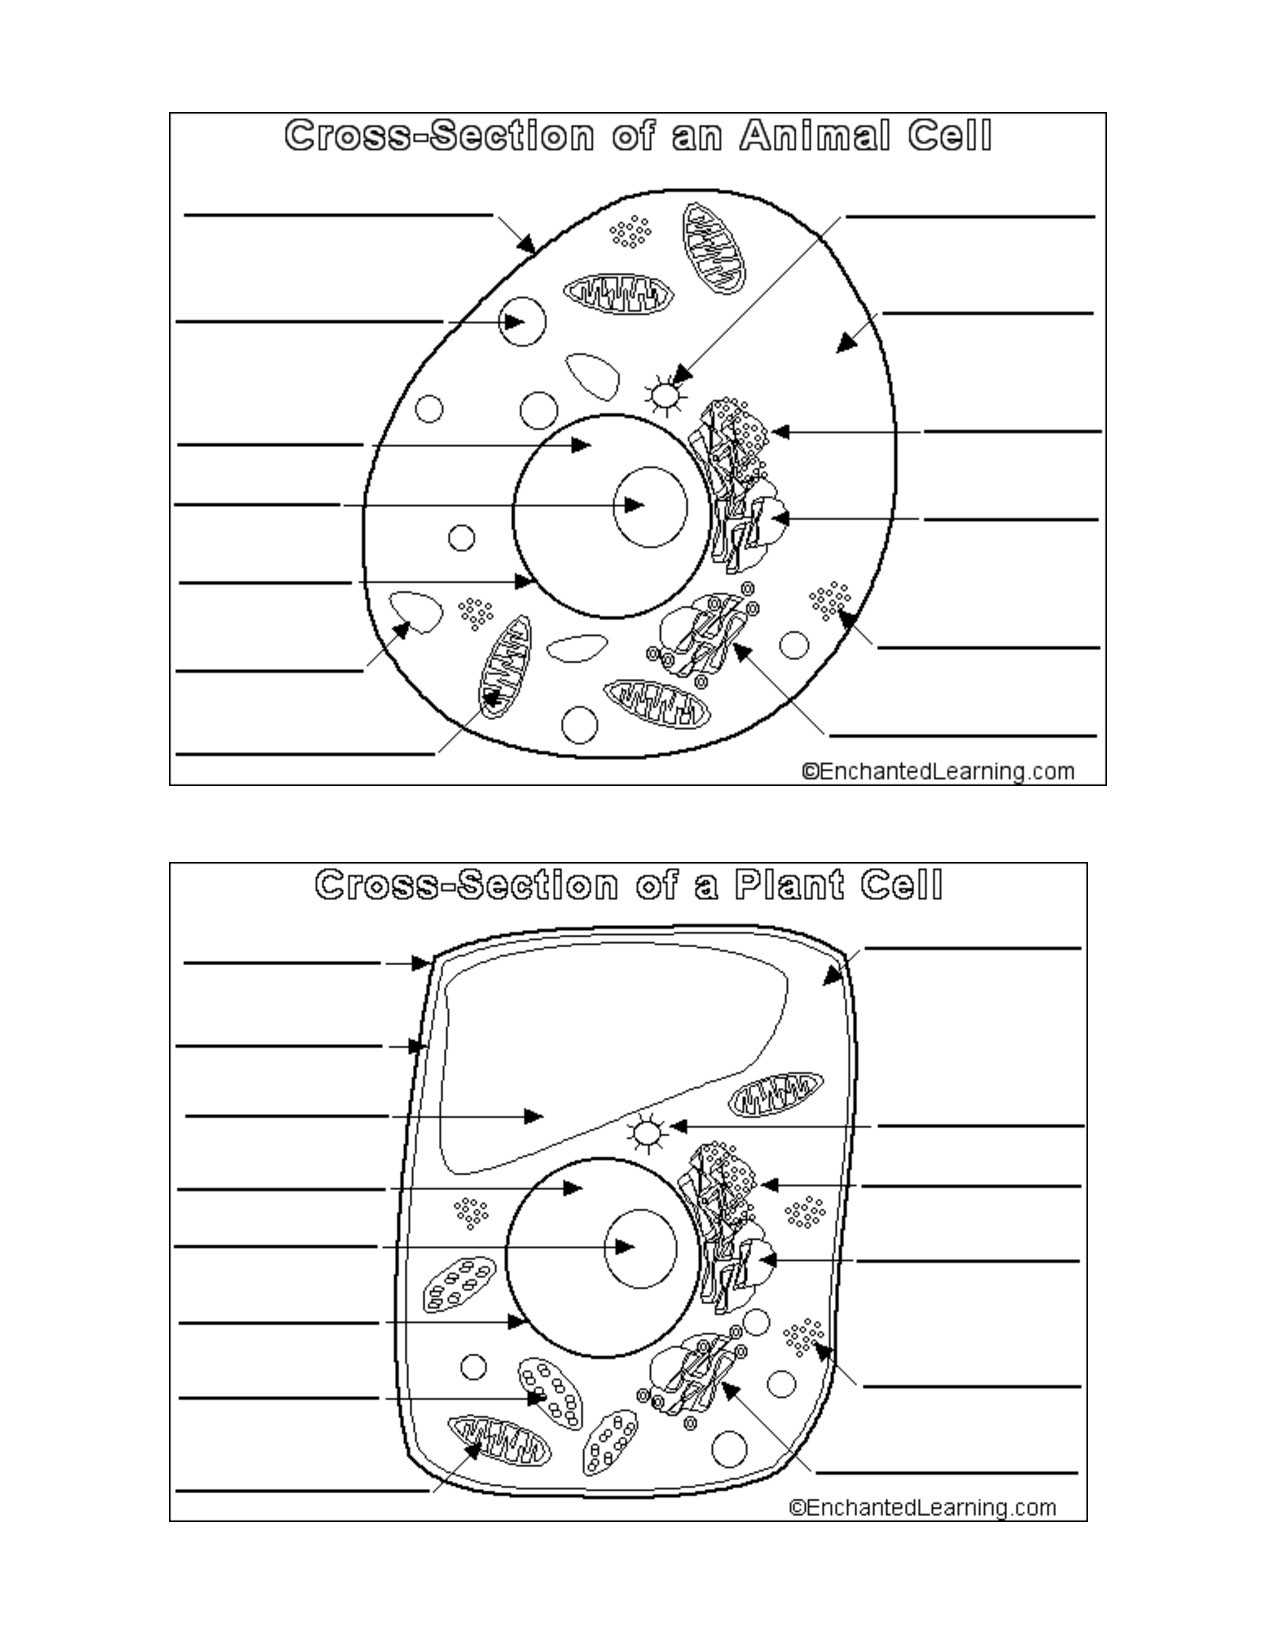 Cell Parts and Functions Worksheet Answers and Cell organelle Diagram New Diagram Cell Parts Luxury Perfect Animal